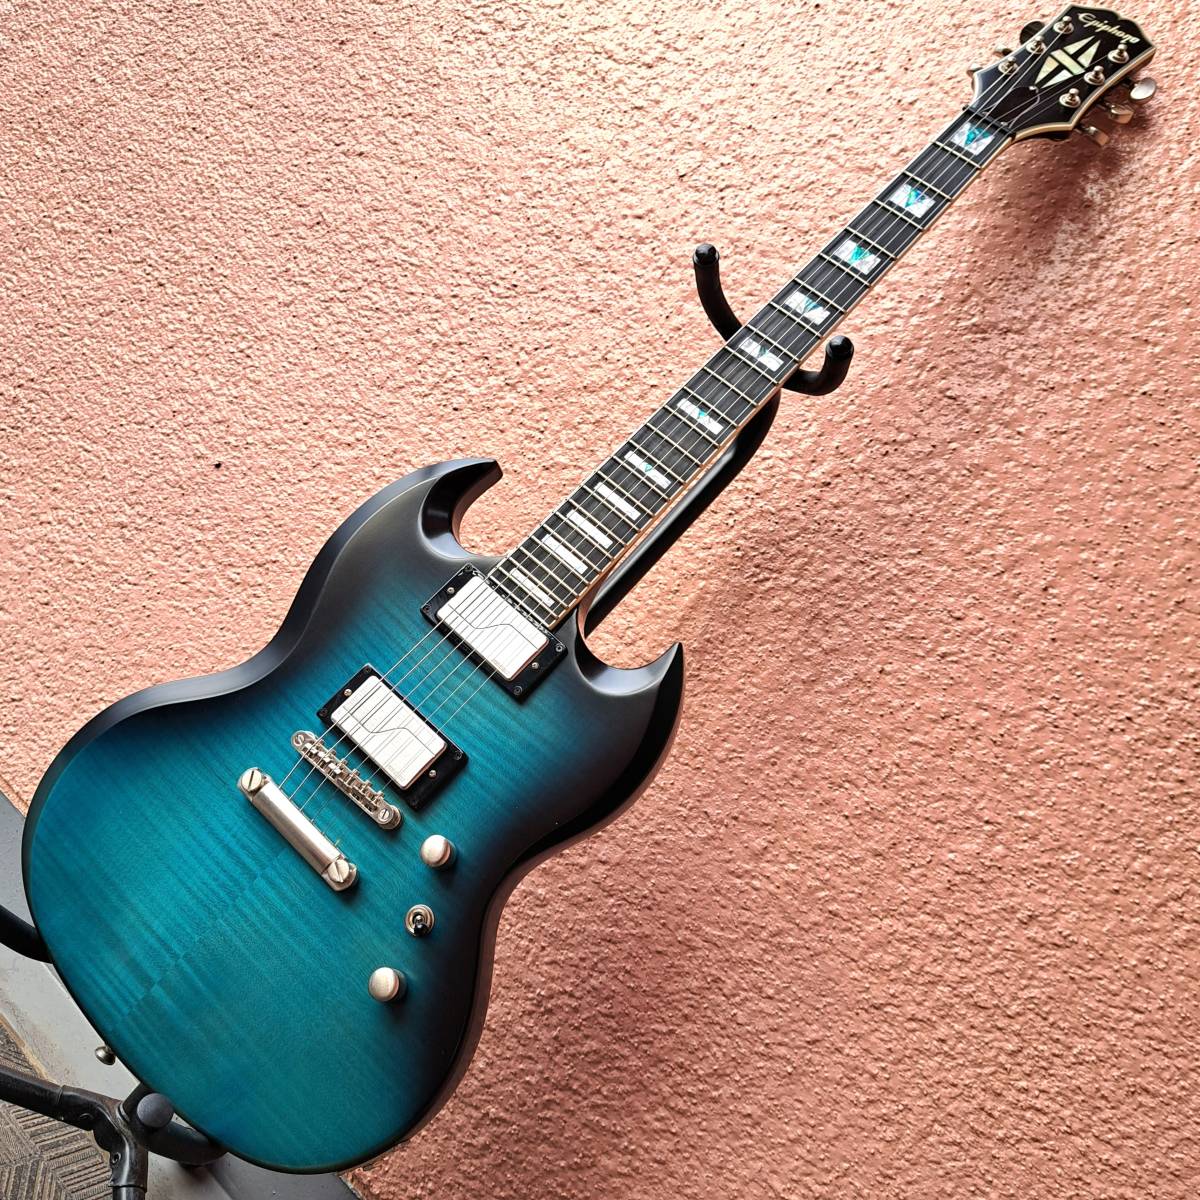 ■Epiphone SG Prophecy エピフォン プロフェシー 美品 Blue Tiger Aged Gloss 24F Ebony エボニー指板 Gibson ギブソン